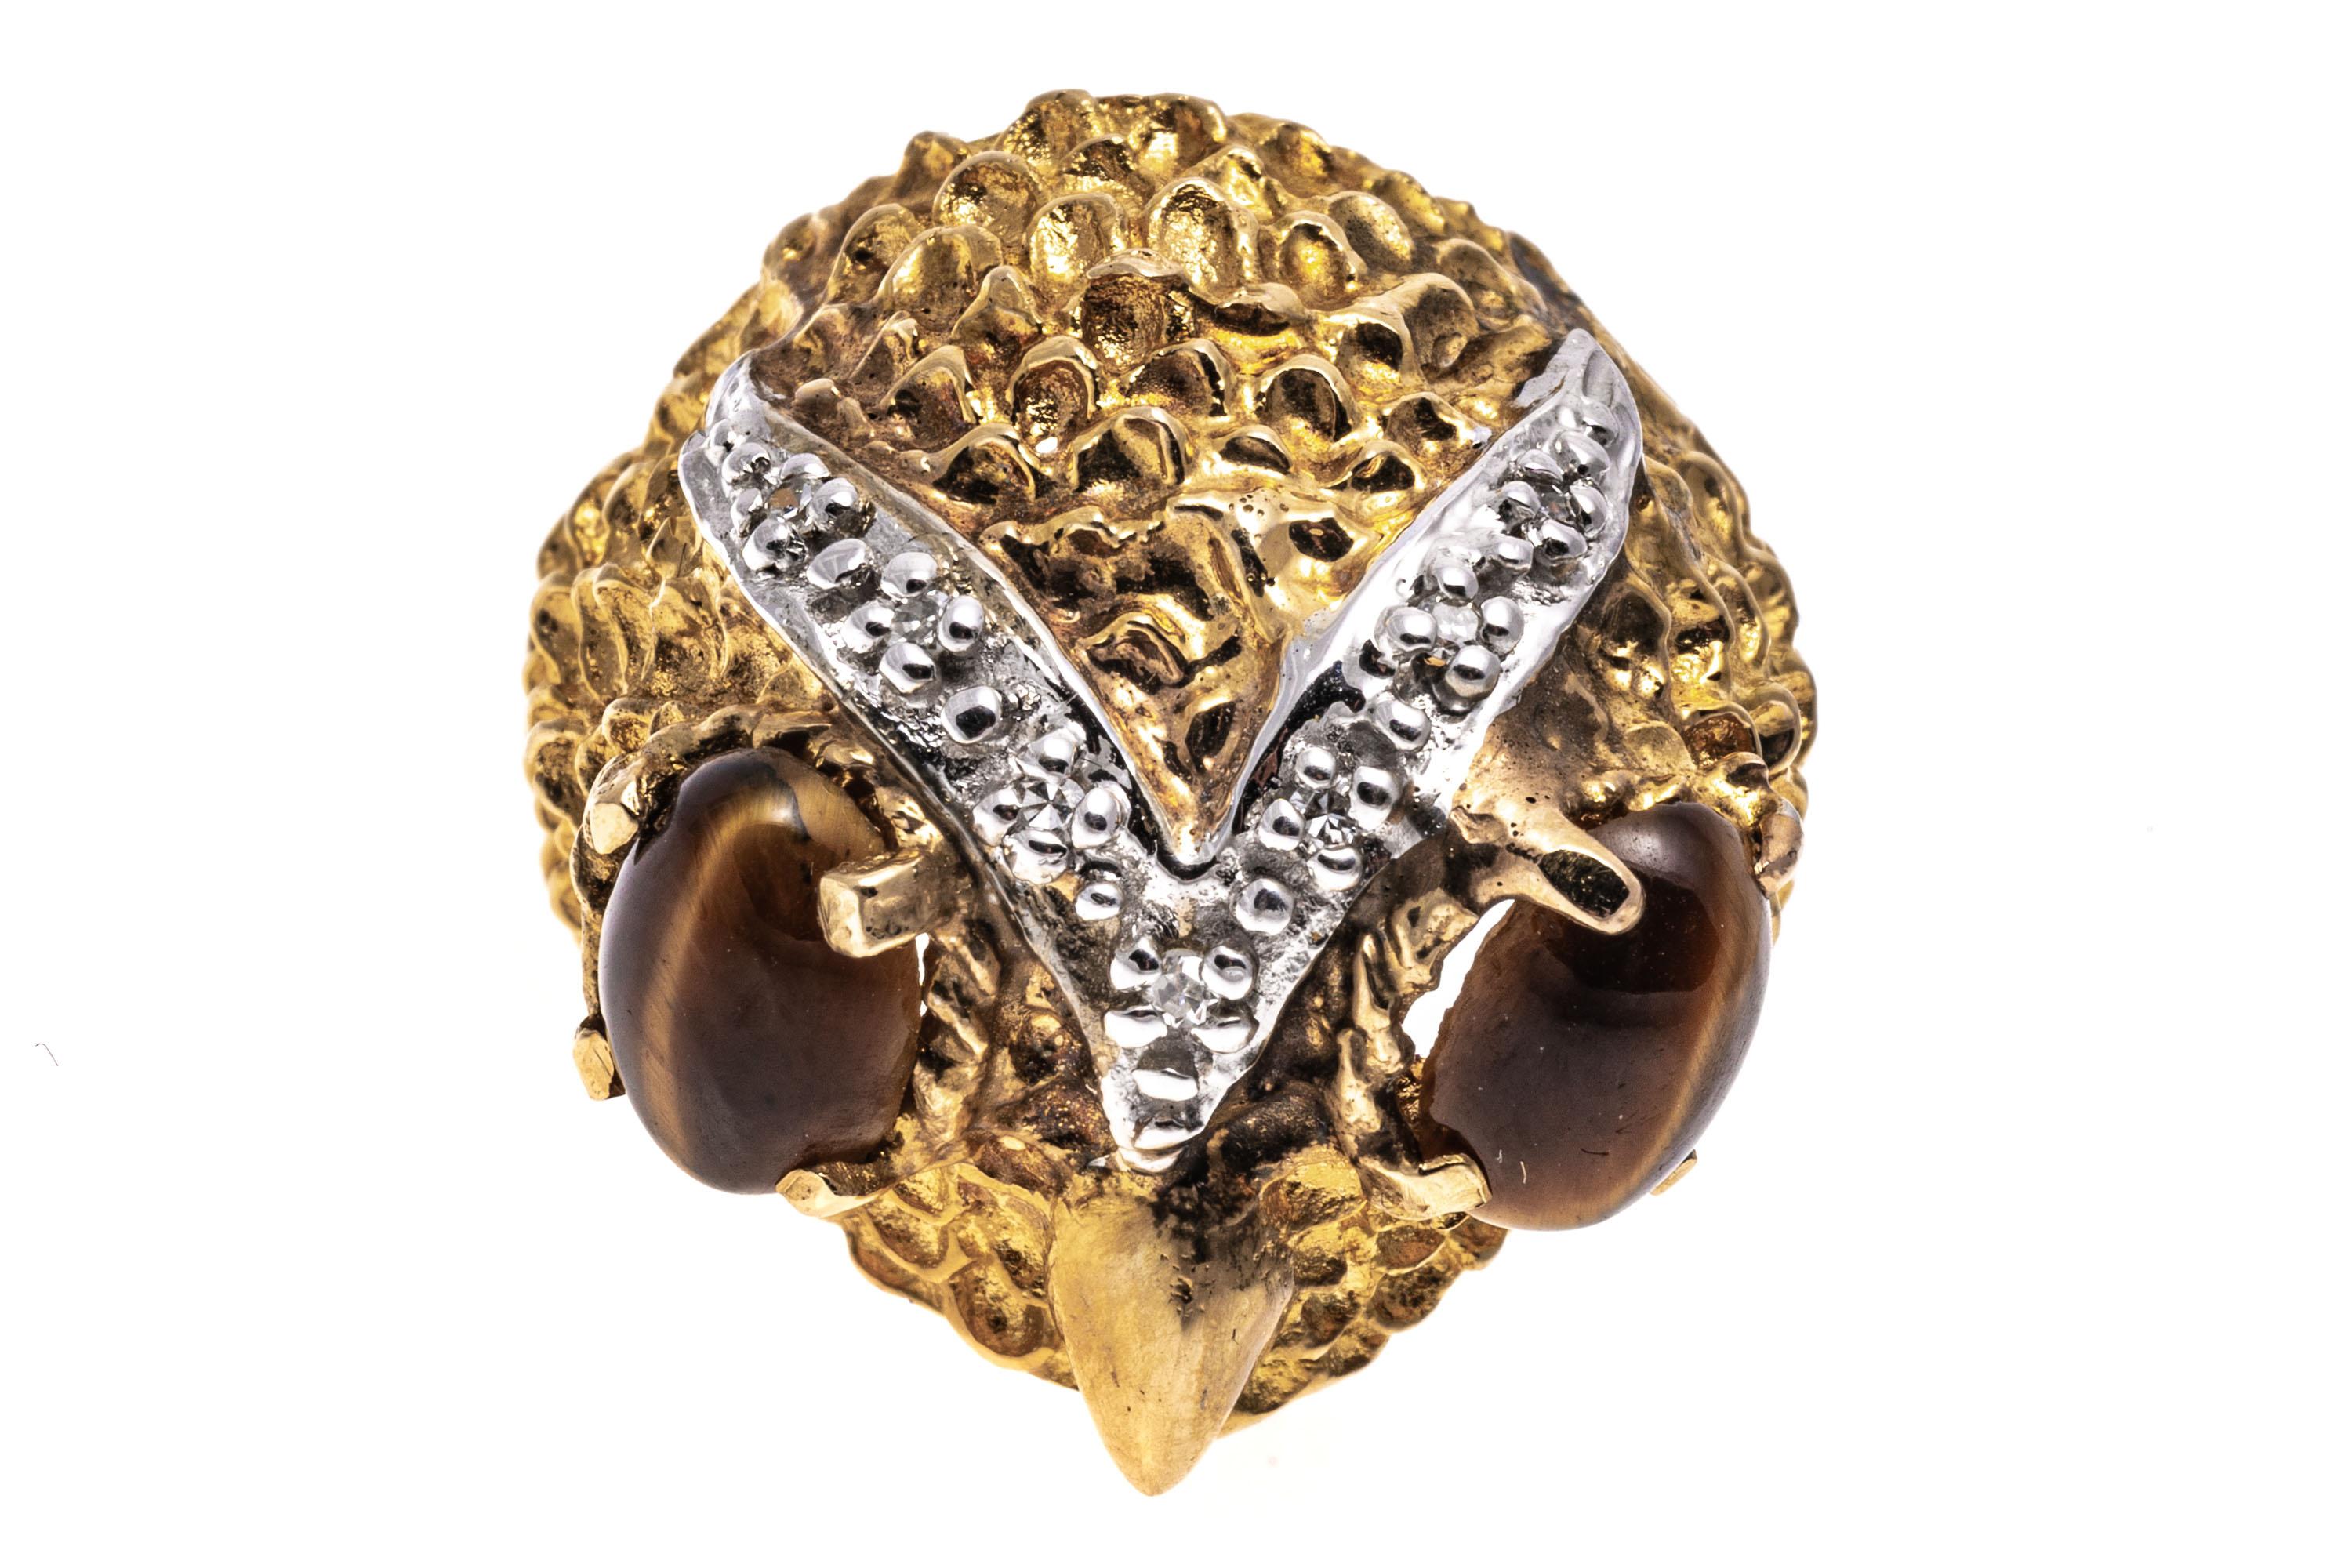 14k Yellow Gold Delightful Textured Owl Head Ring With Diamonds, 0.05 TCW
This delightful ring is an owl head motif, decorated with matte, textured feathers, a high polished beak and two oval cabachon cut tigers eye eyes, prong set. Decorating the